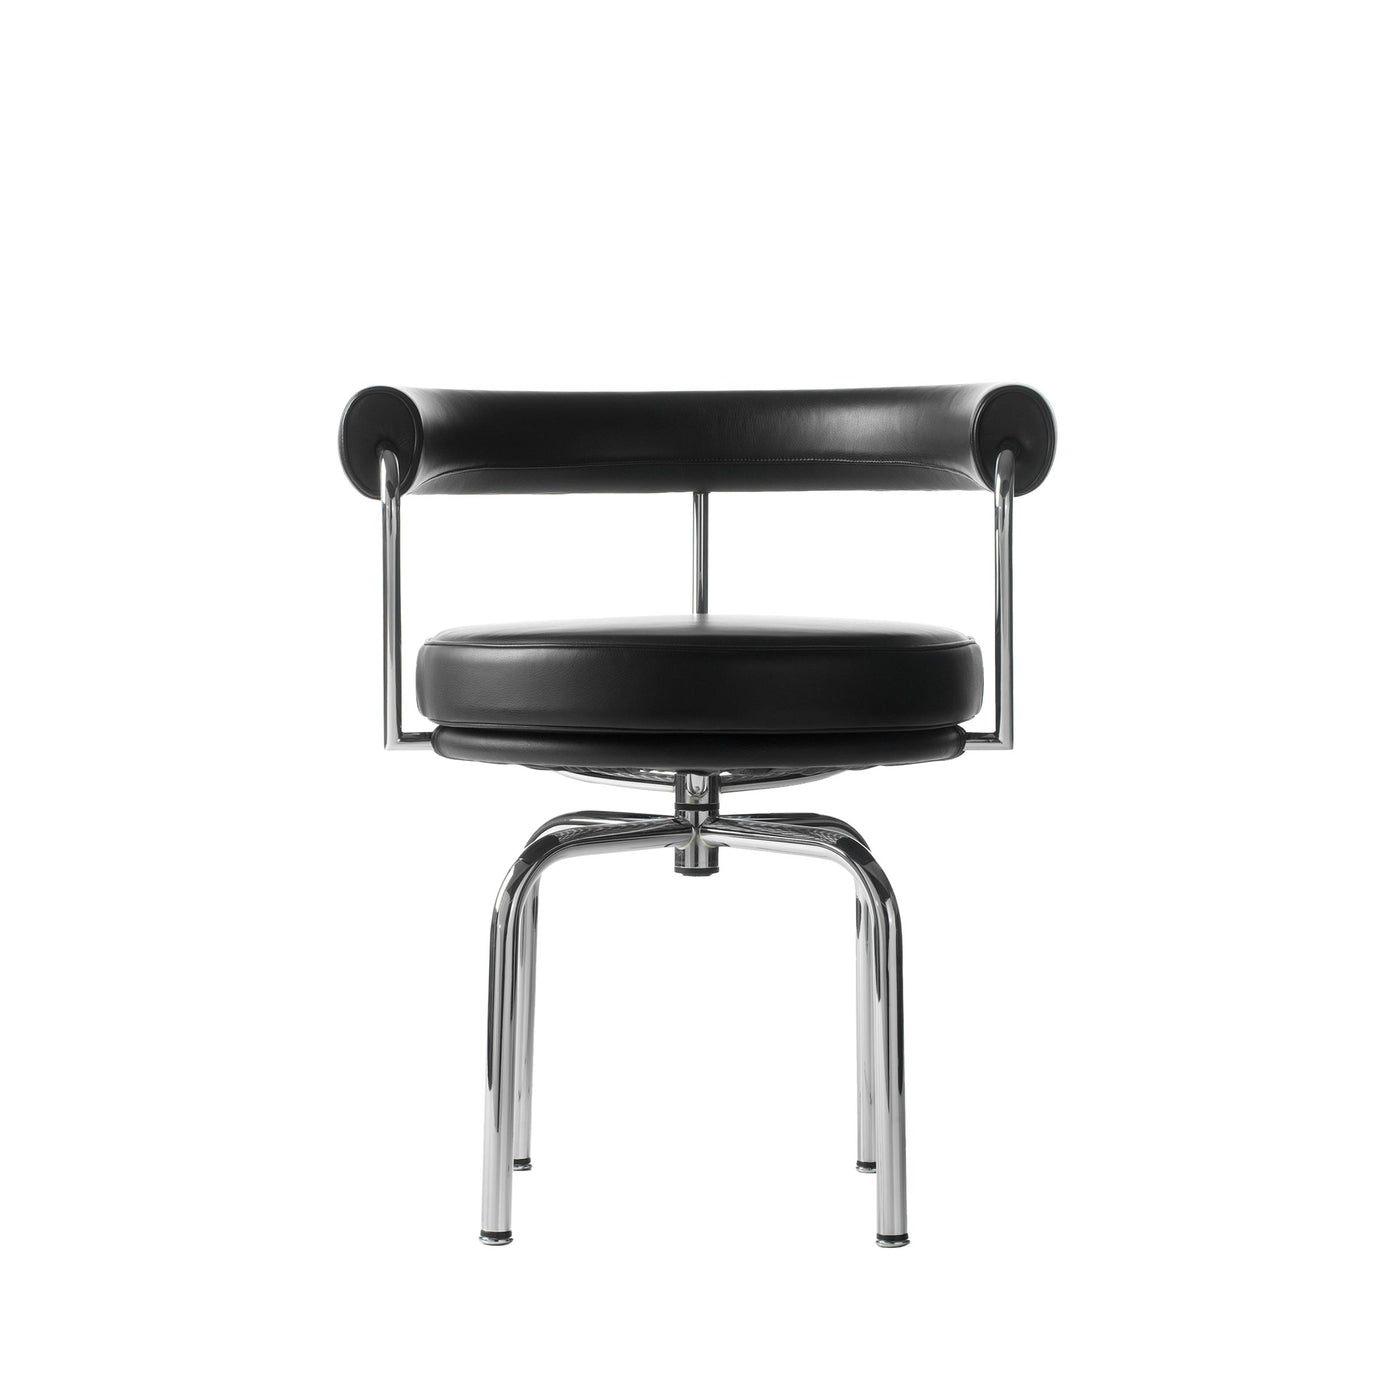 Armchair - "7, Siège Tournant, Fauteuil", designed by Charlotte Perriand  for Cassina 03